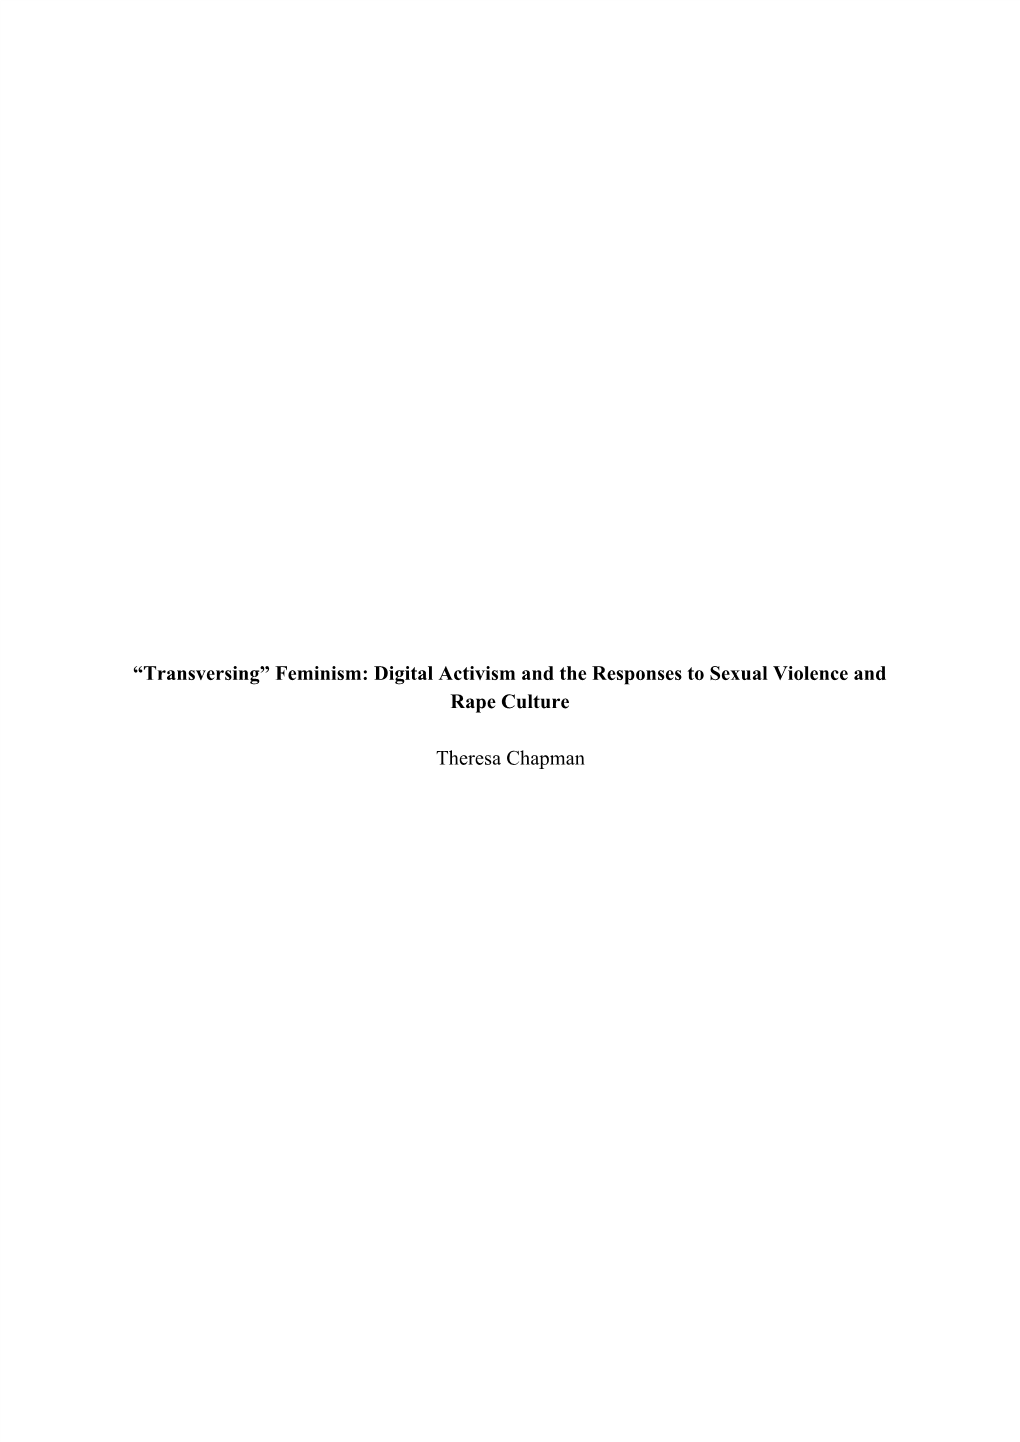 Feminism: Digital Activism and the Responses to Sexual Violence and ​ ​ Rape Culture